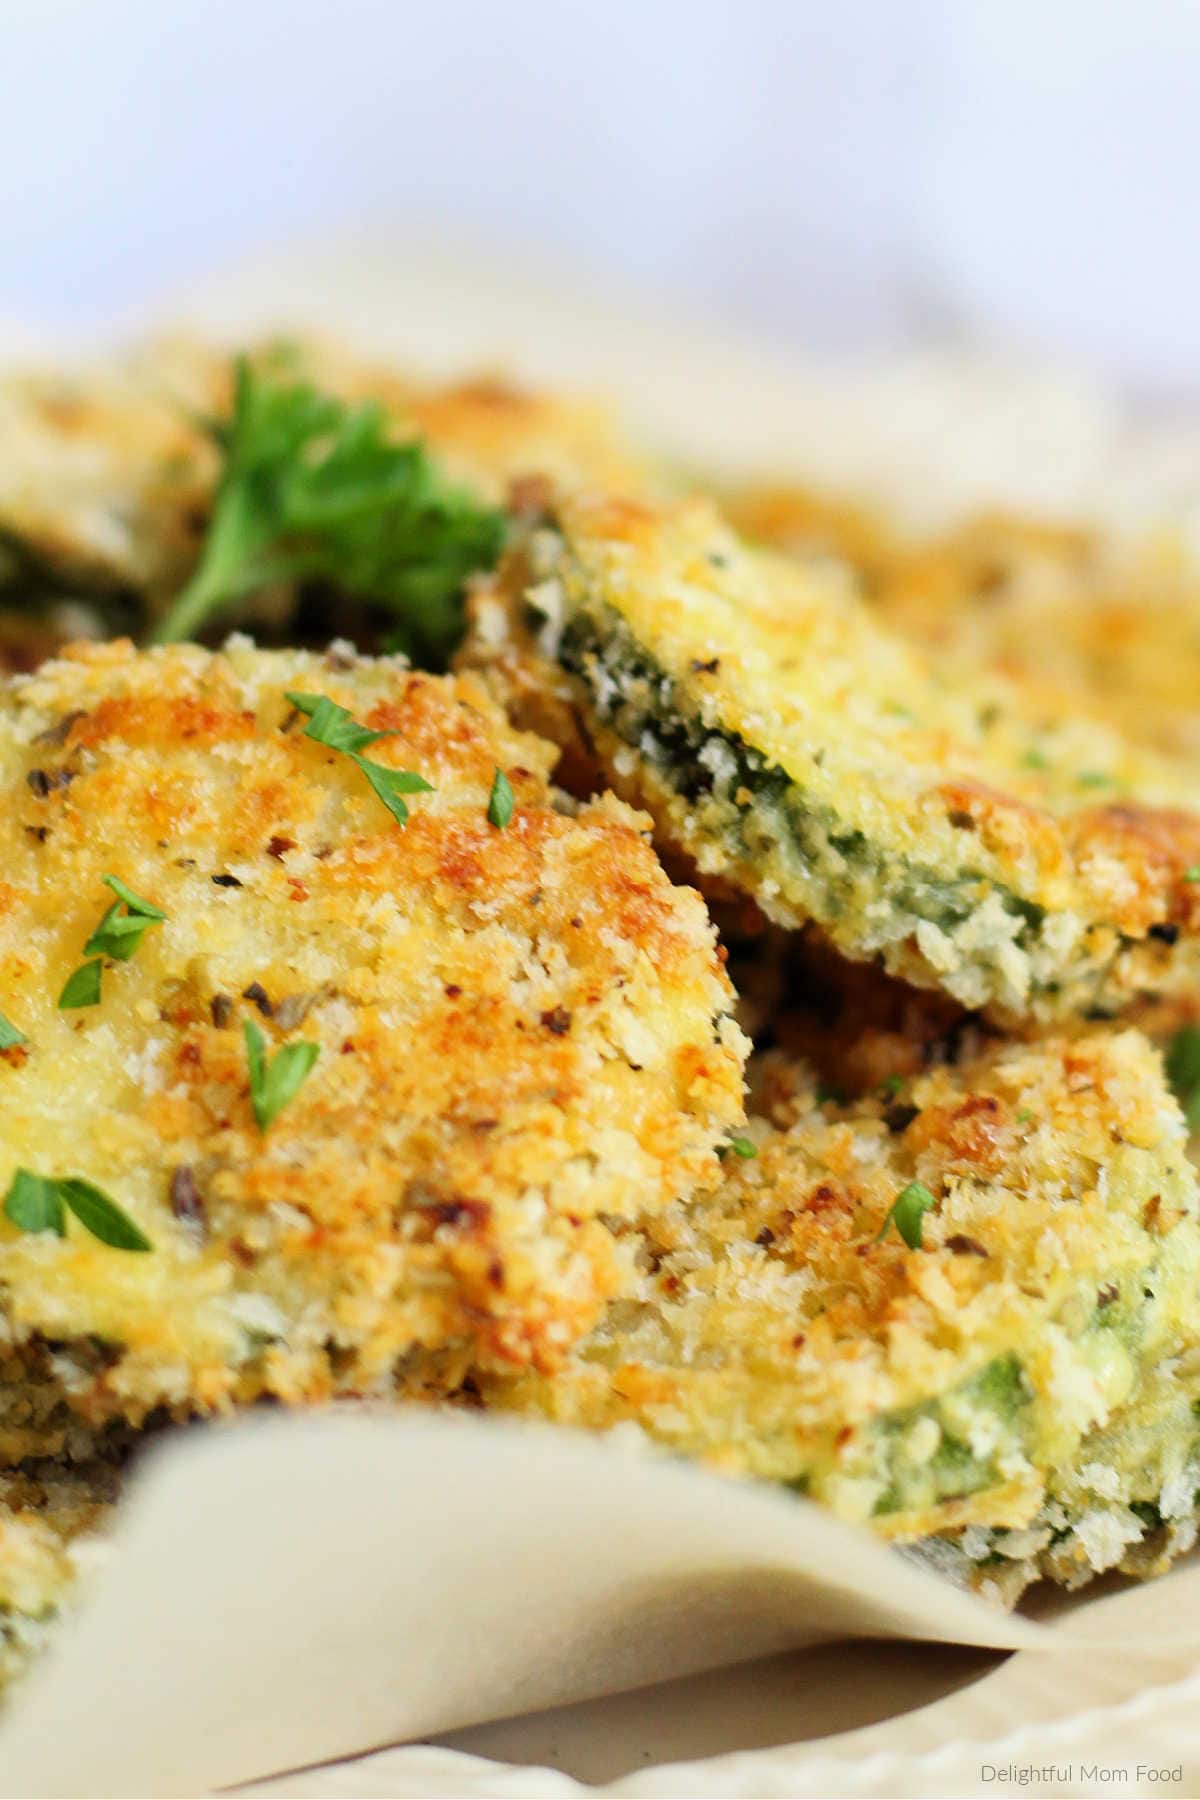 Parmesan zucchini chips sliced breaded and baked